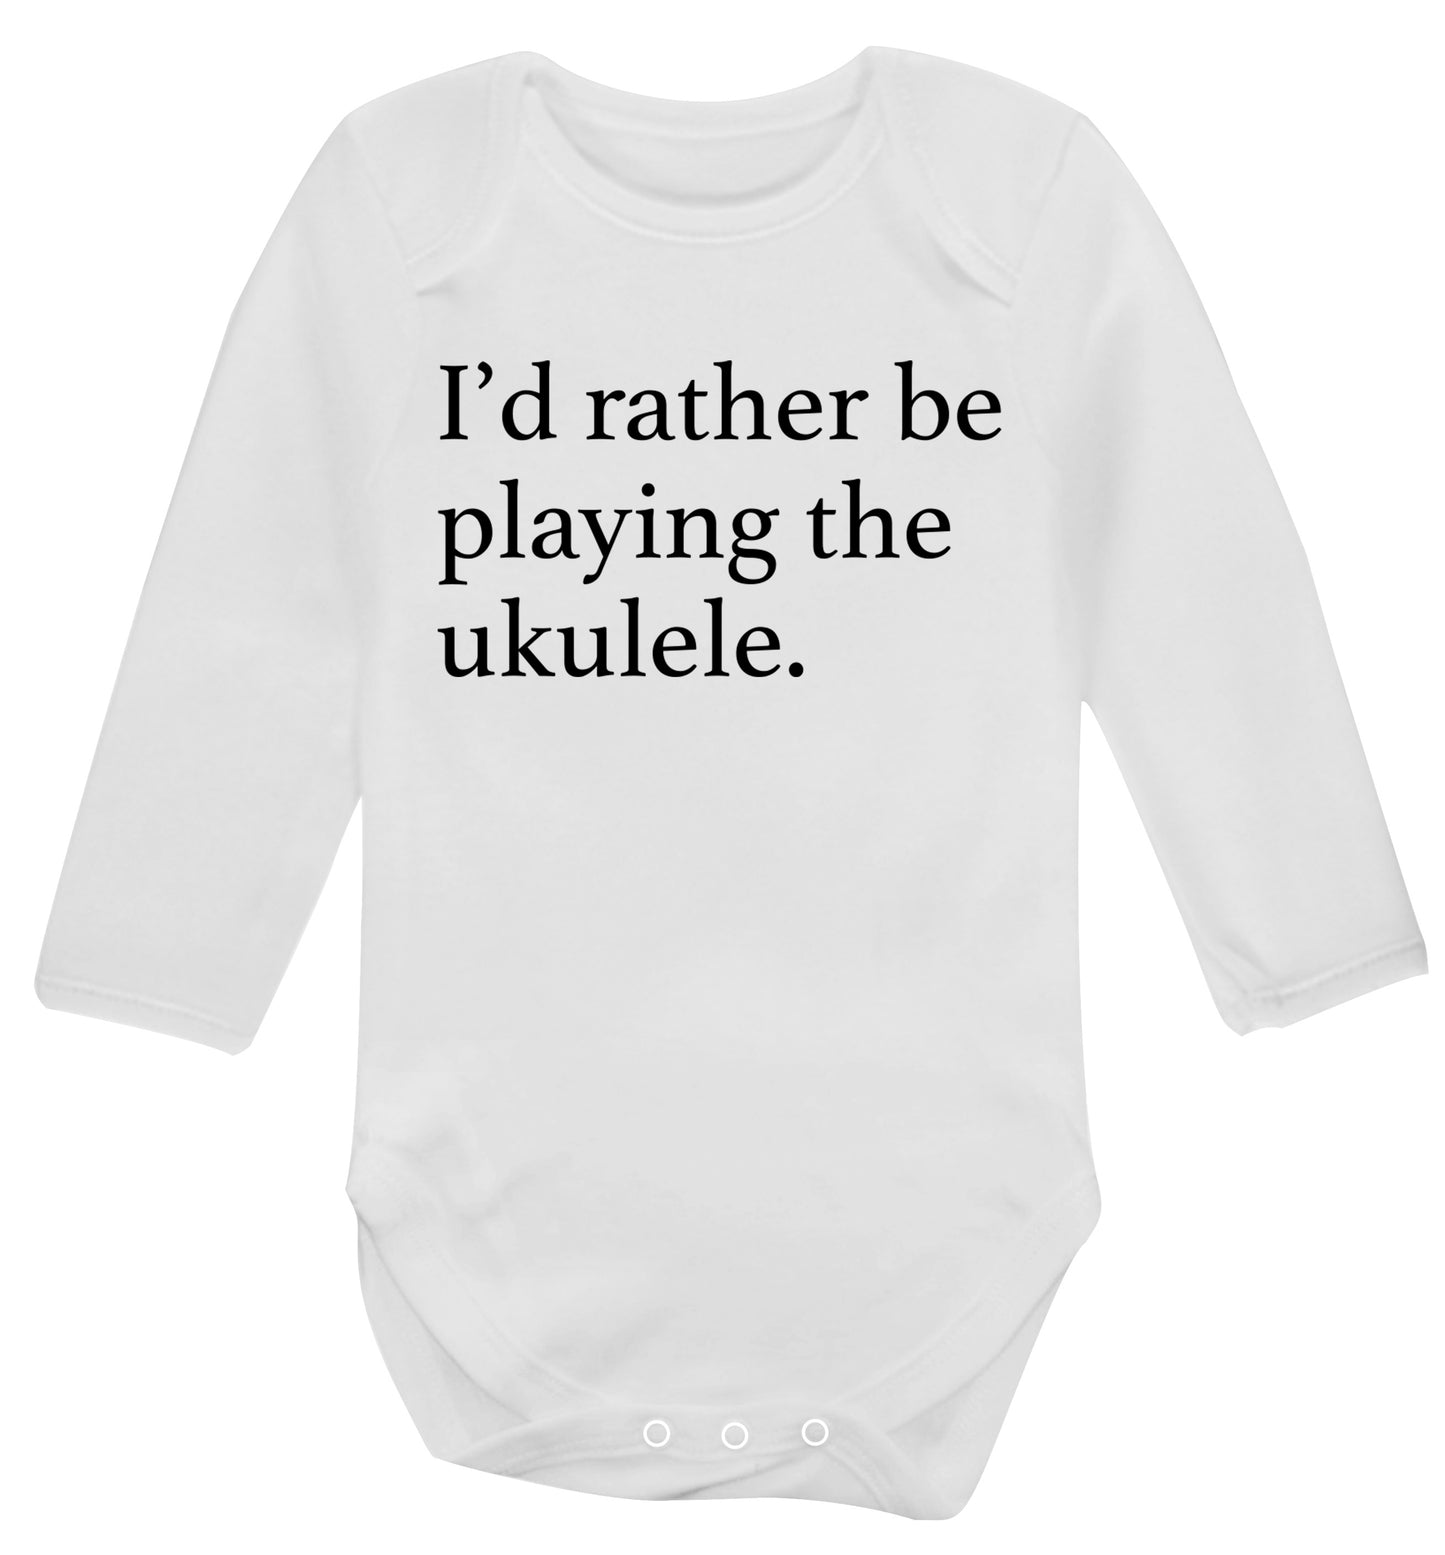 I'd rather by playing the ukulele Baby Vest long sleeved white 6-12 months